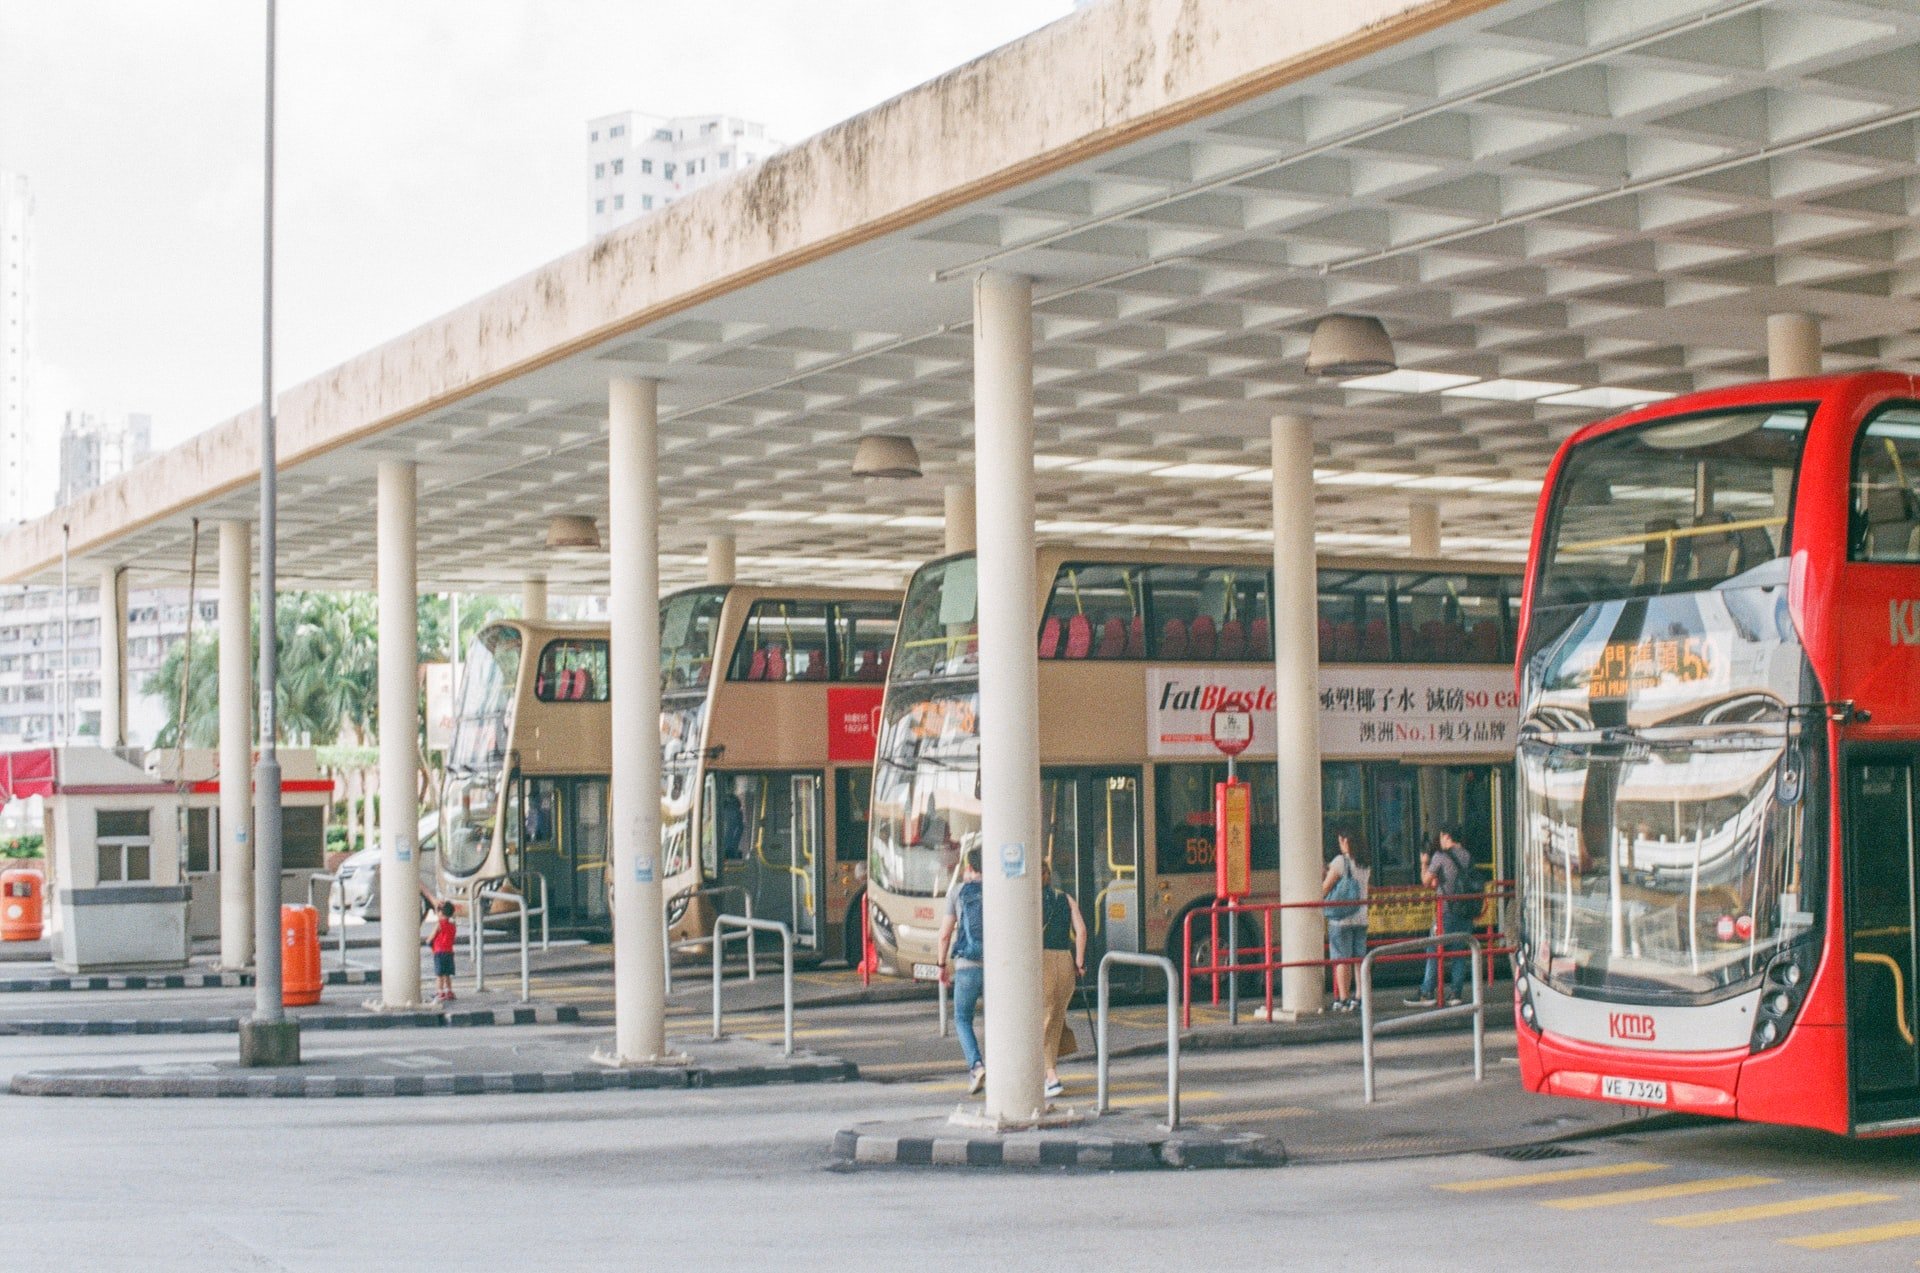 A bus station with buses parked | Source: Unsplash